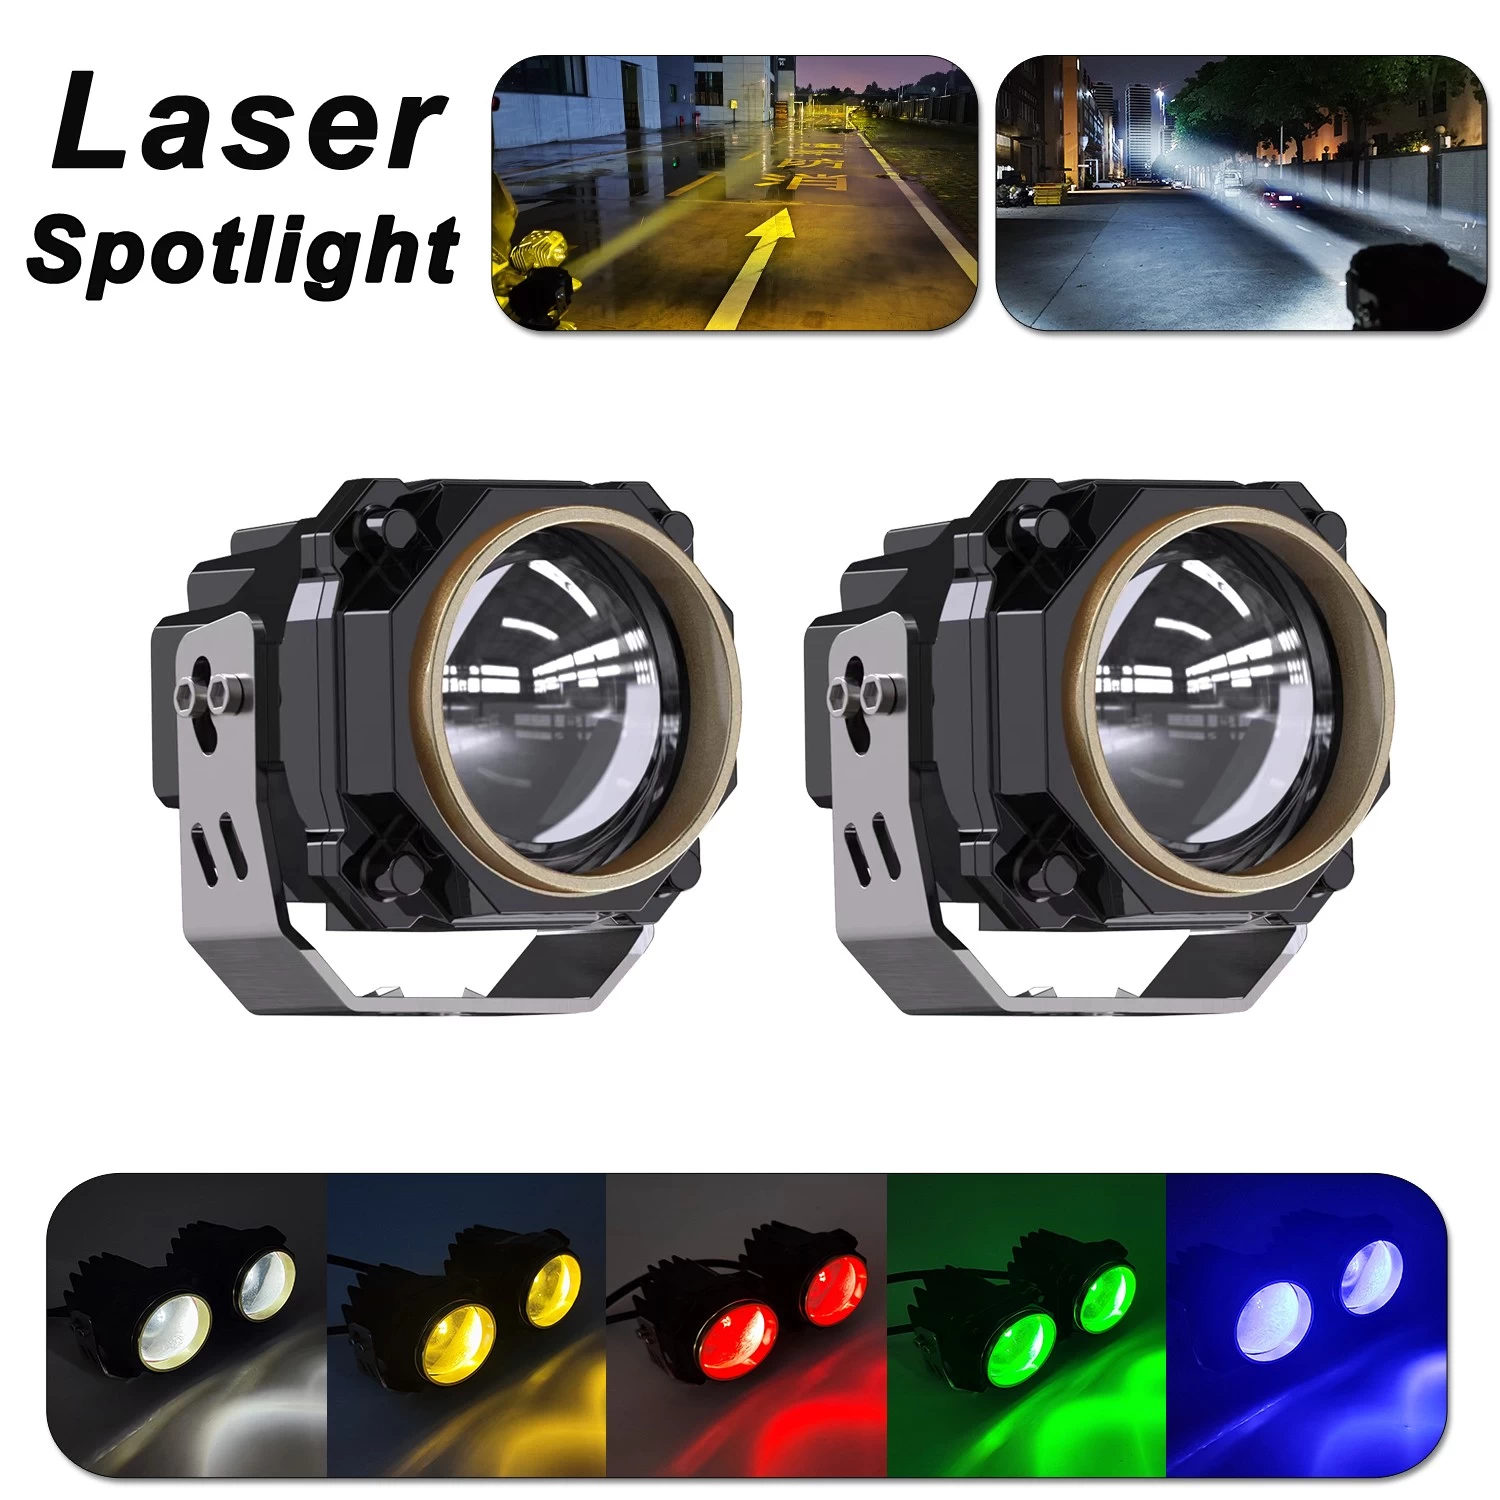 China Motorcycle Laser Spotlight Fog Lamp Auxiliary Lights White Yellow Red Green Blue Motorcycle Spot Driving Fog Lights 60W 7800lm 2 pack manufacturer